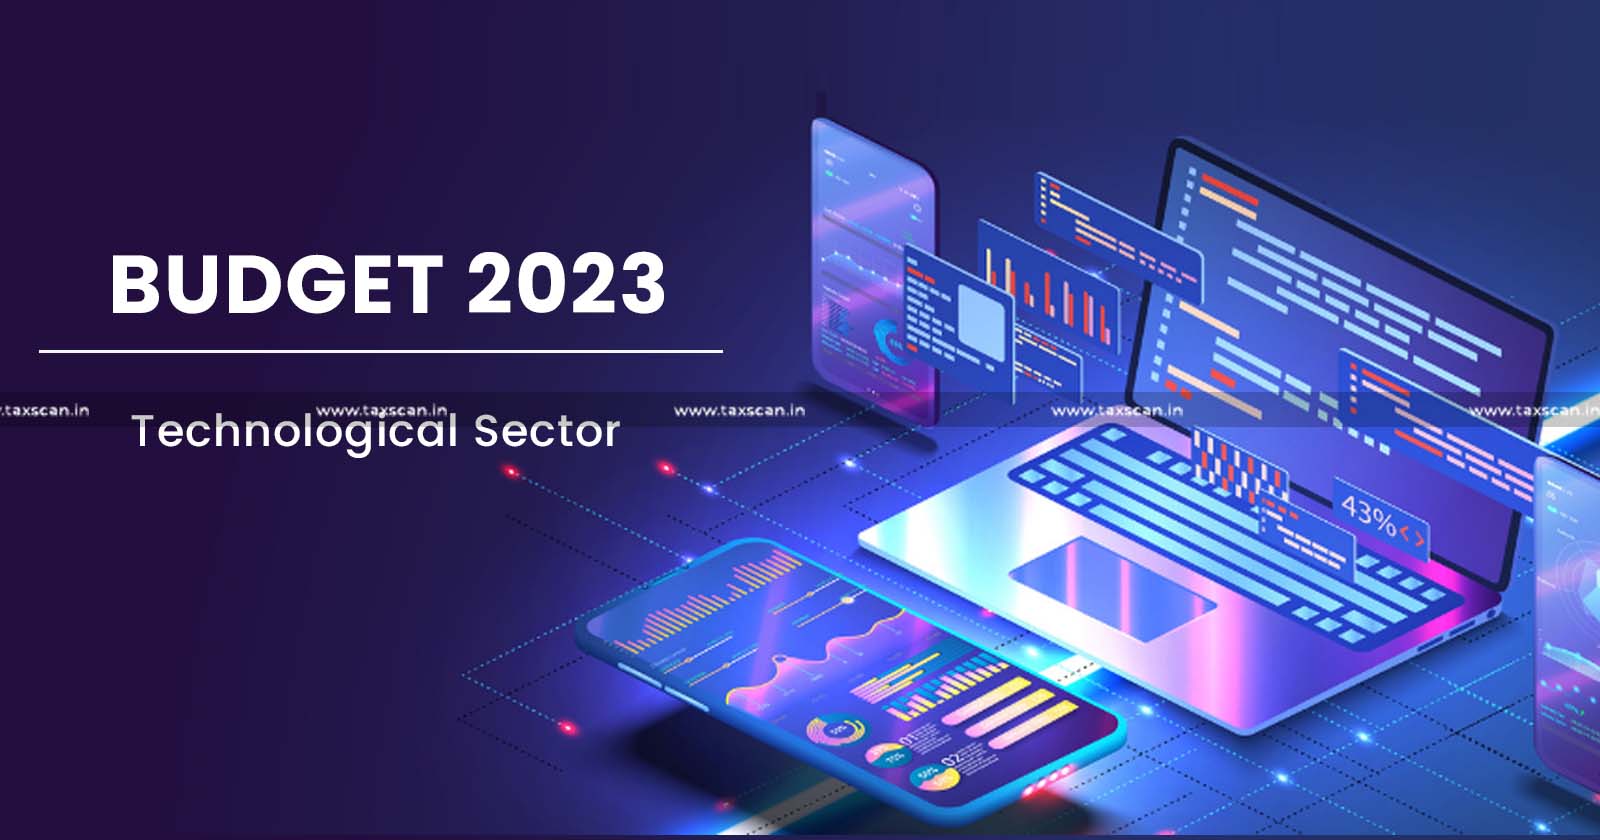 budget 2023 - Anticipating Changes - Technological Sector - budget 2023 live - union budget 2023 - nirmala sitharaman budget - nirmala sitharaman union budget - nirmala sitharaman - budget 2023 india - Taxscan